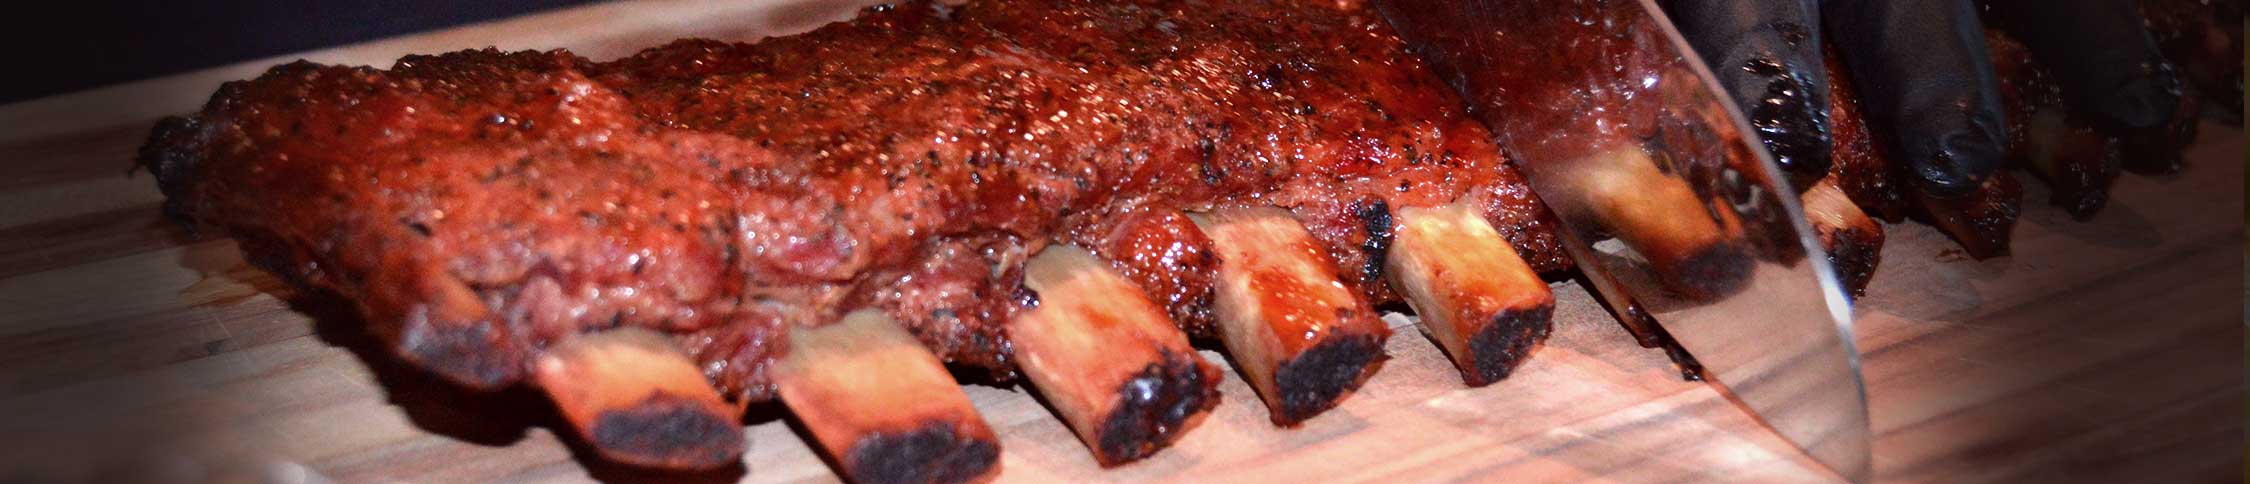 Smoked St. Louis Style Ribs